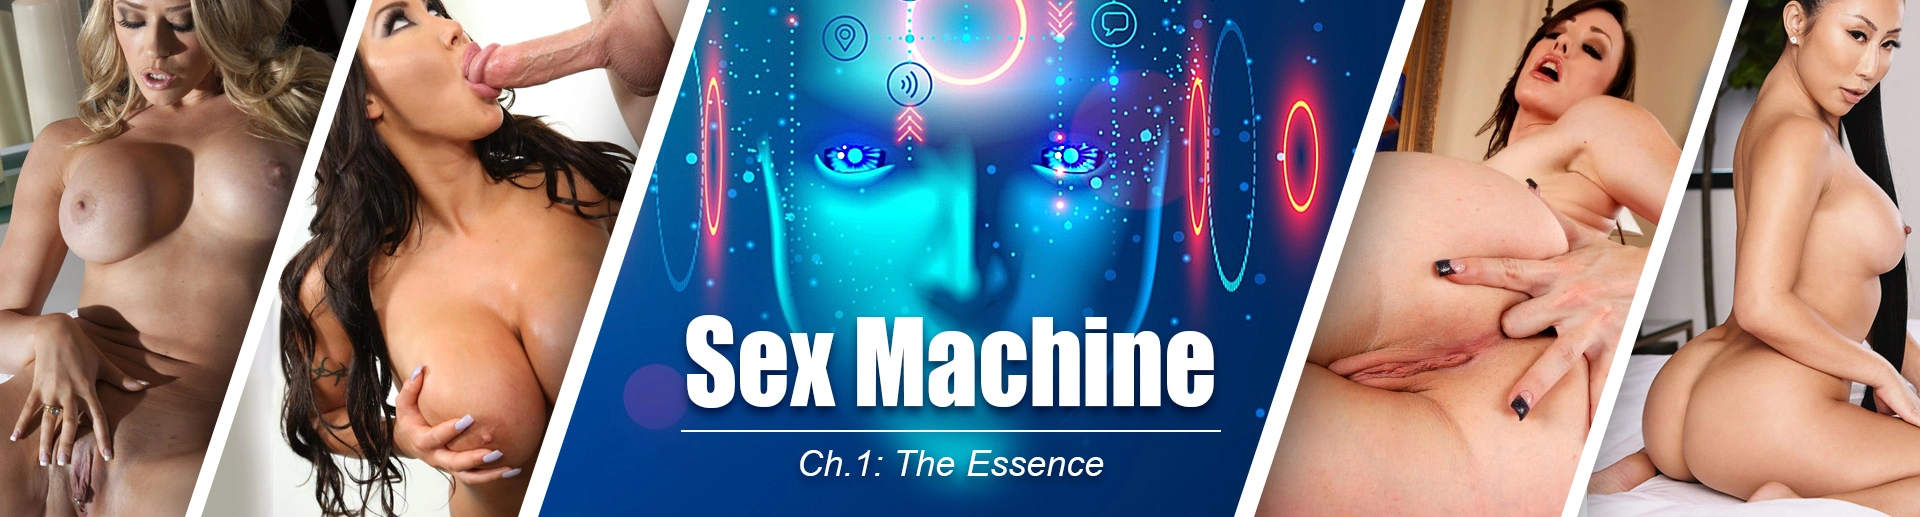 SexMachine. Chapter 1: The Essence main image